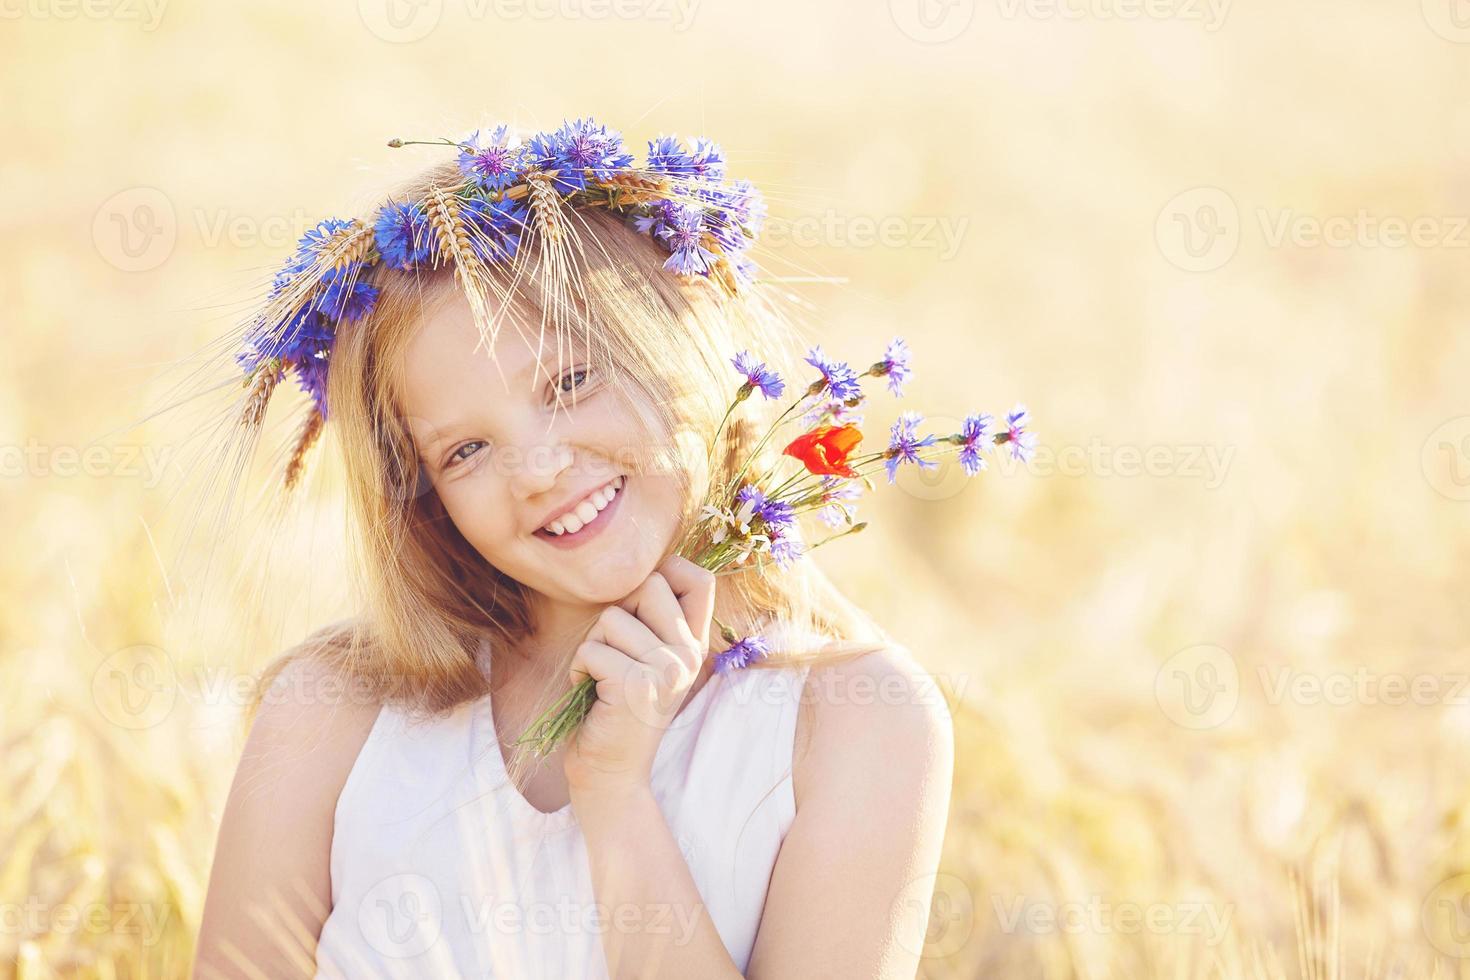 Happy girl with flowers crown at summer wheat field photo